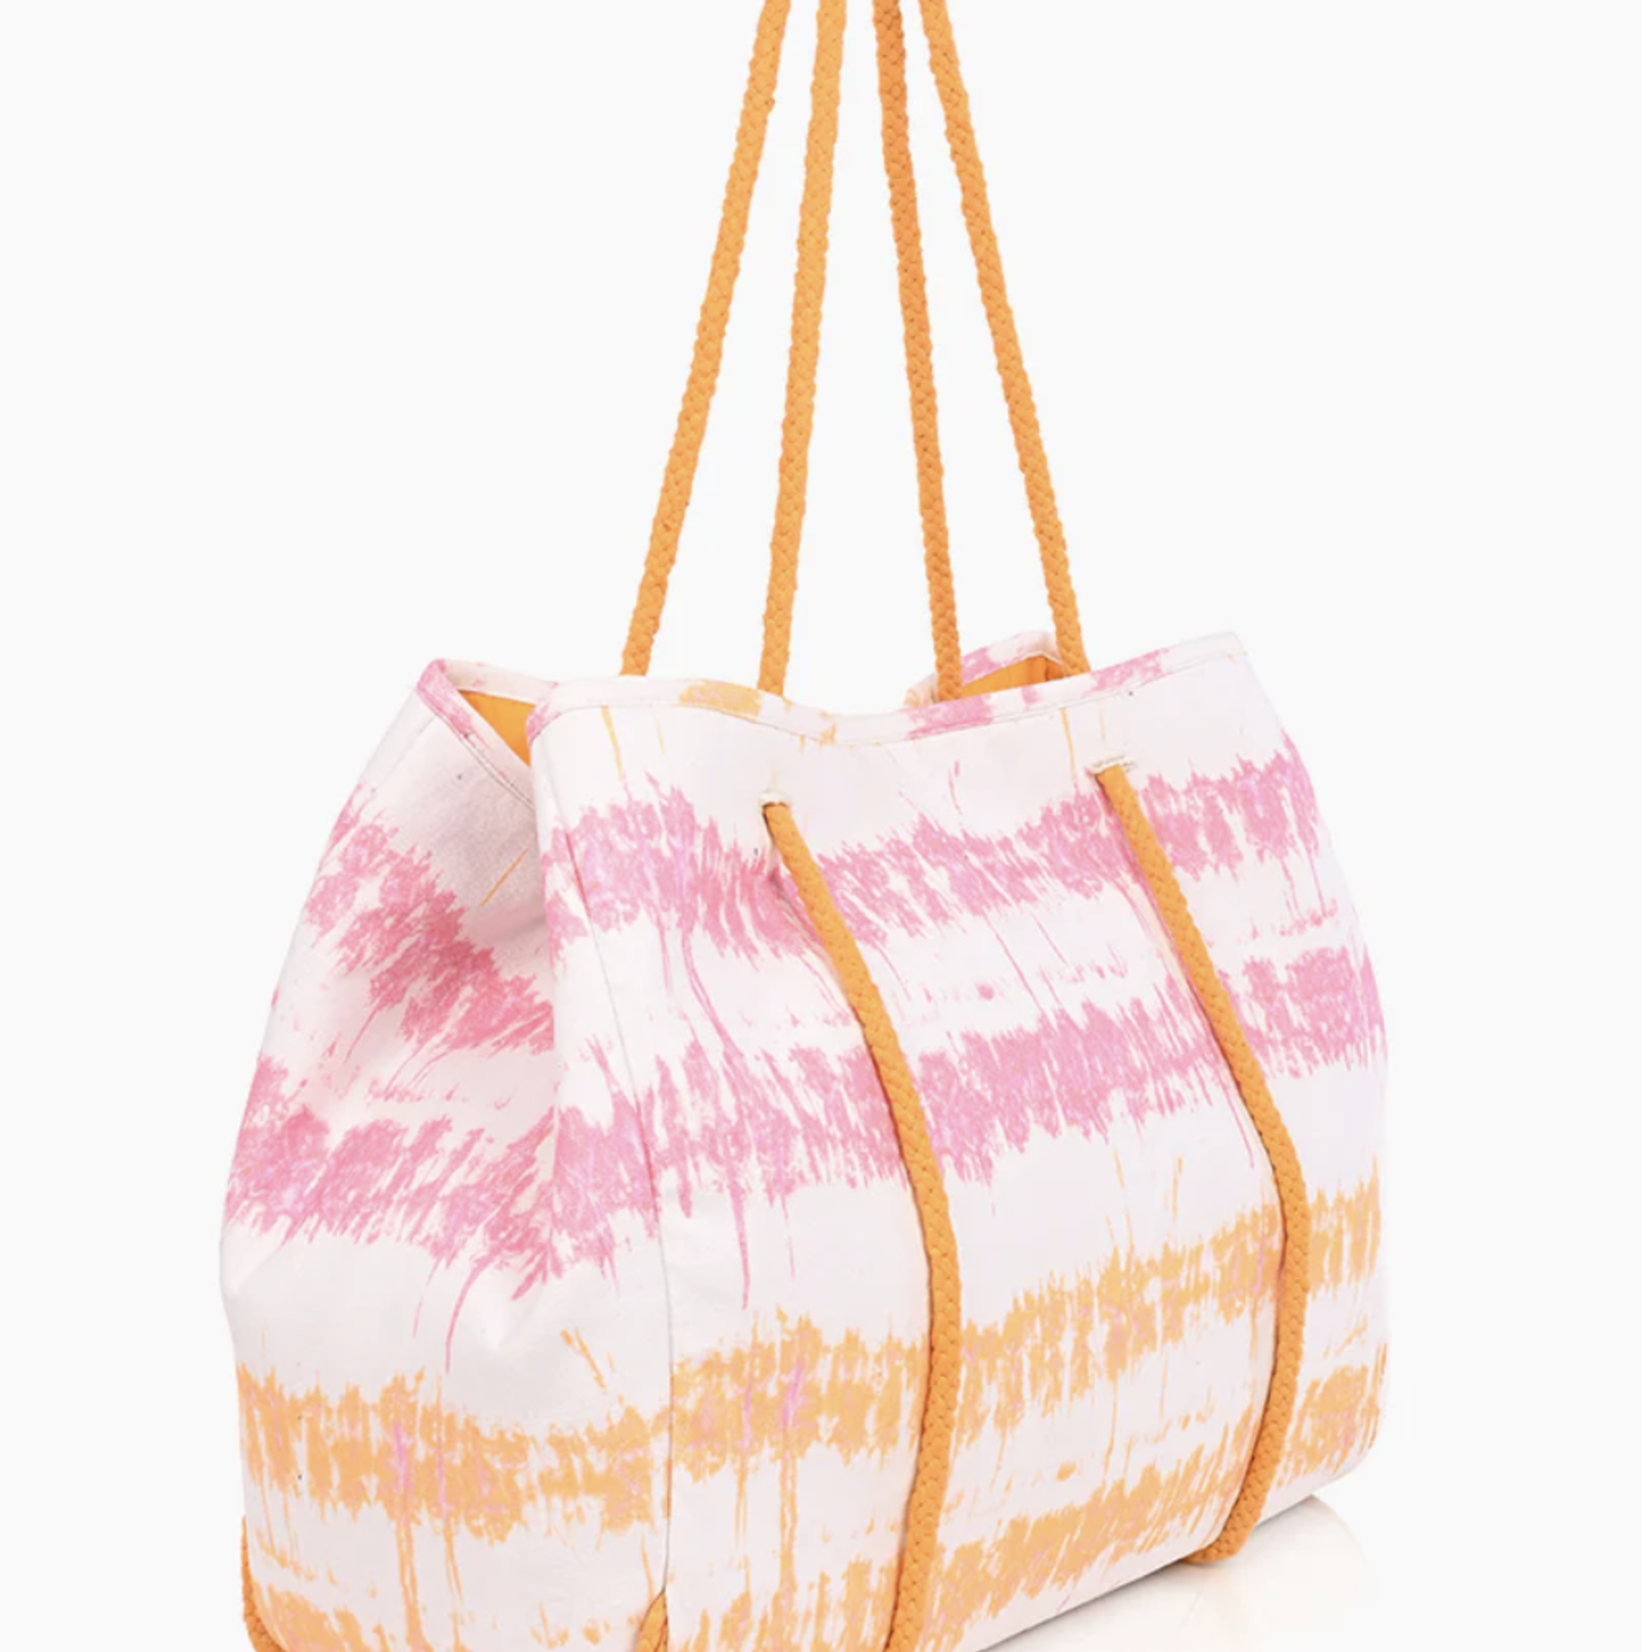 AMERICA AND BEYOND Reva Tie Dye Tote- Hand Dyed Tie Dye Tote